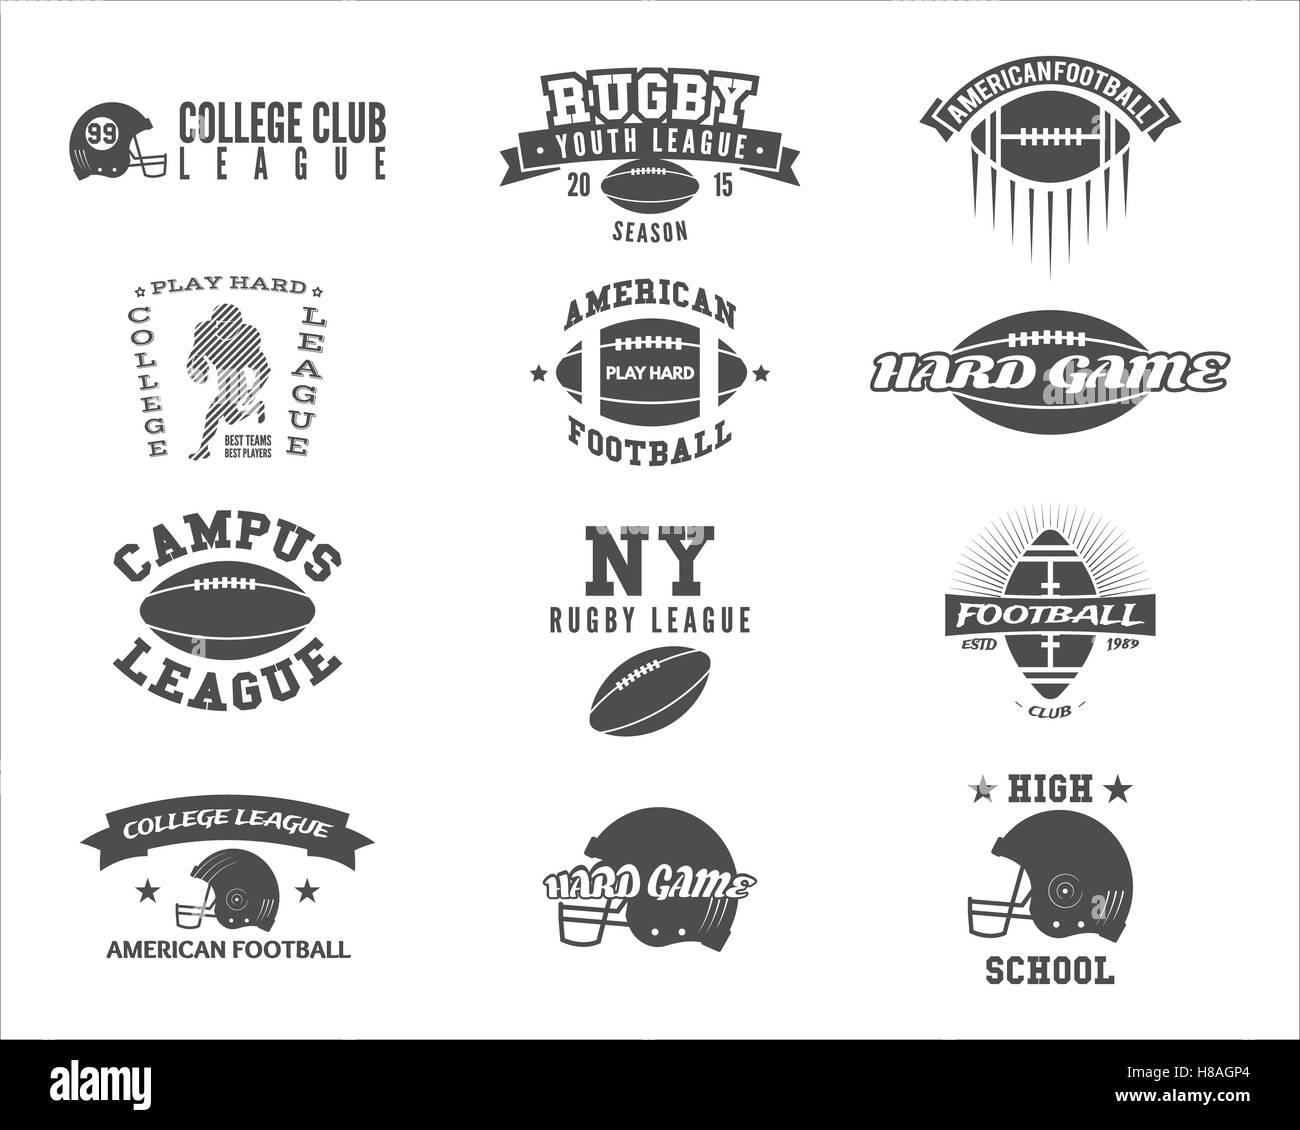 College rugby and american football team badges, logos, labels, insignias in retro style. Graphic vintage design for league tournaments, t-shirt, websites. Sports print on a white background. Stock Photo